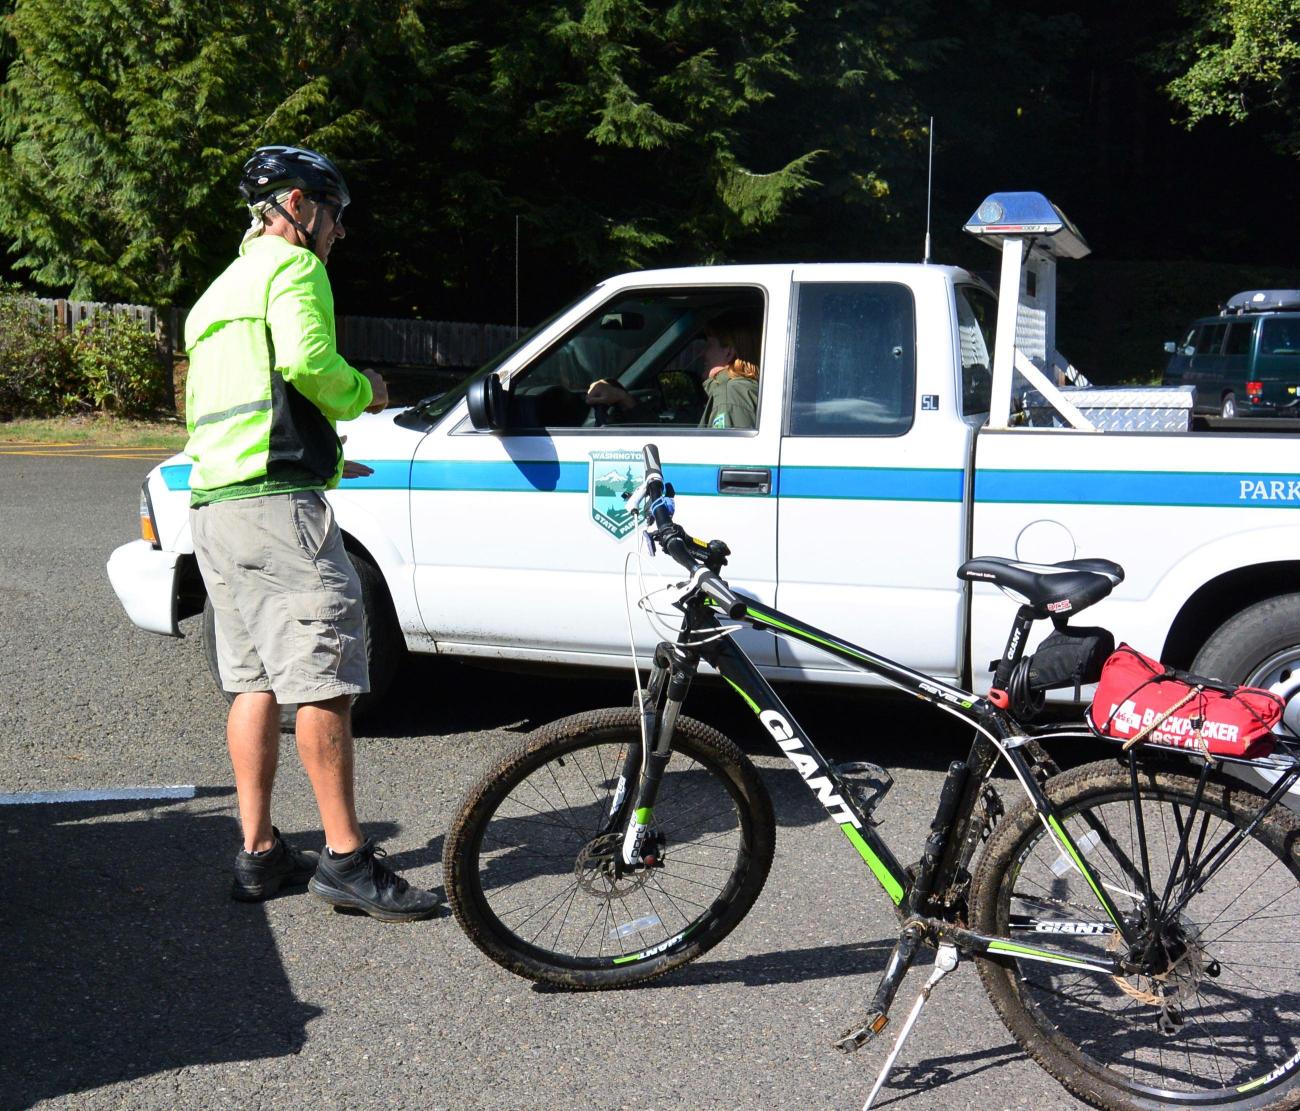 Bicyclists converse with park staff, who is sitting in a ranger truck.